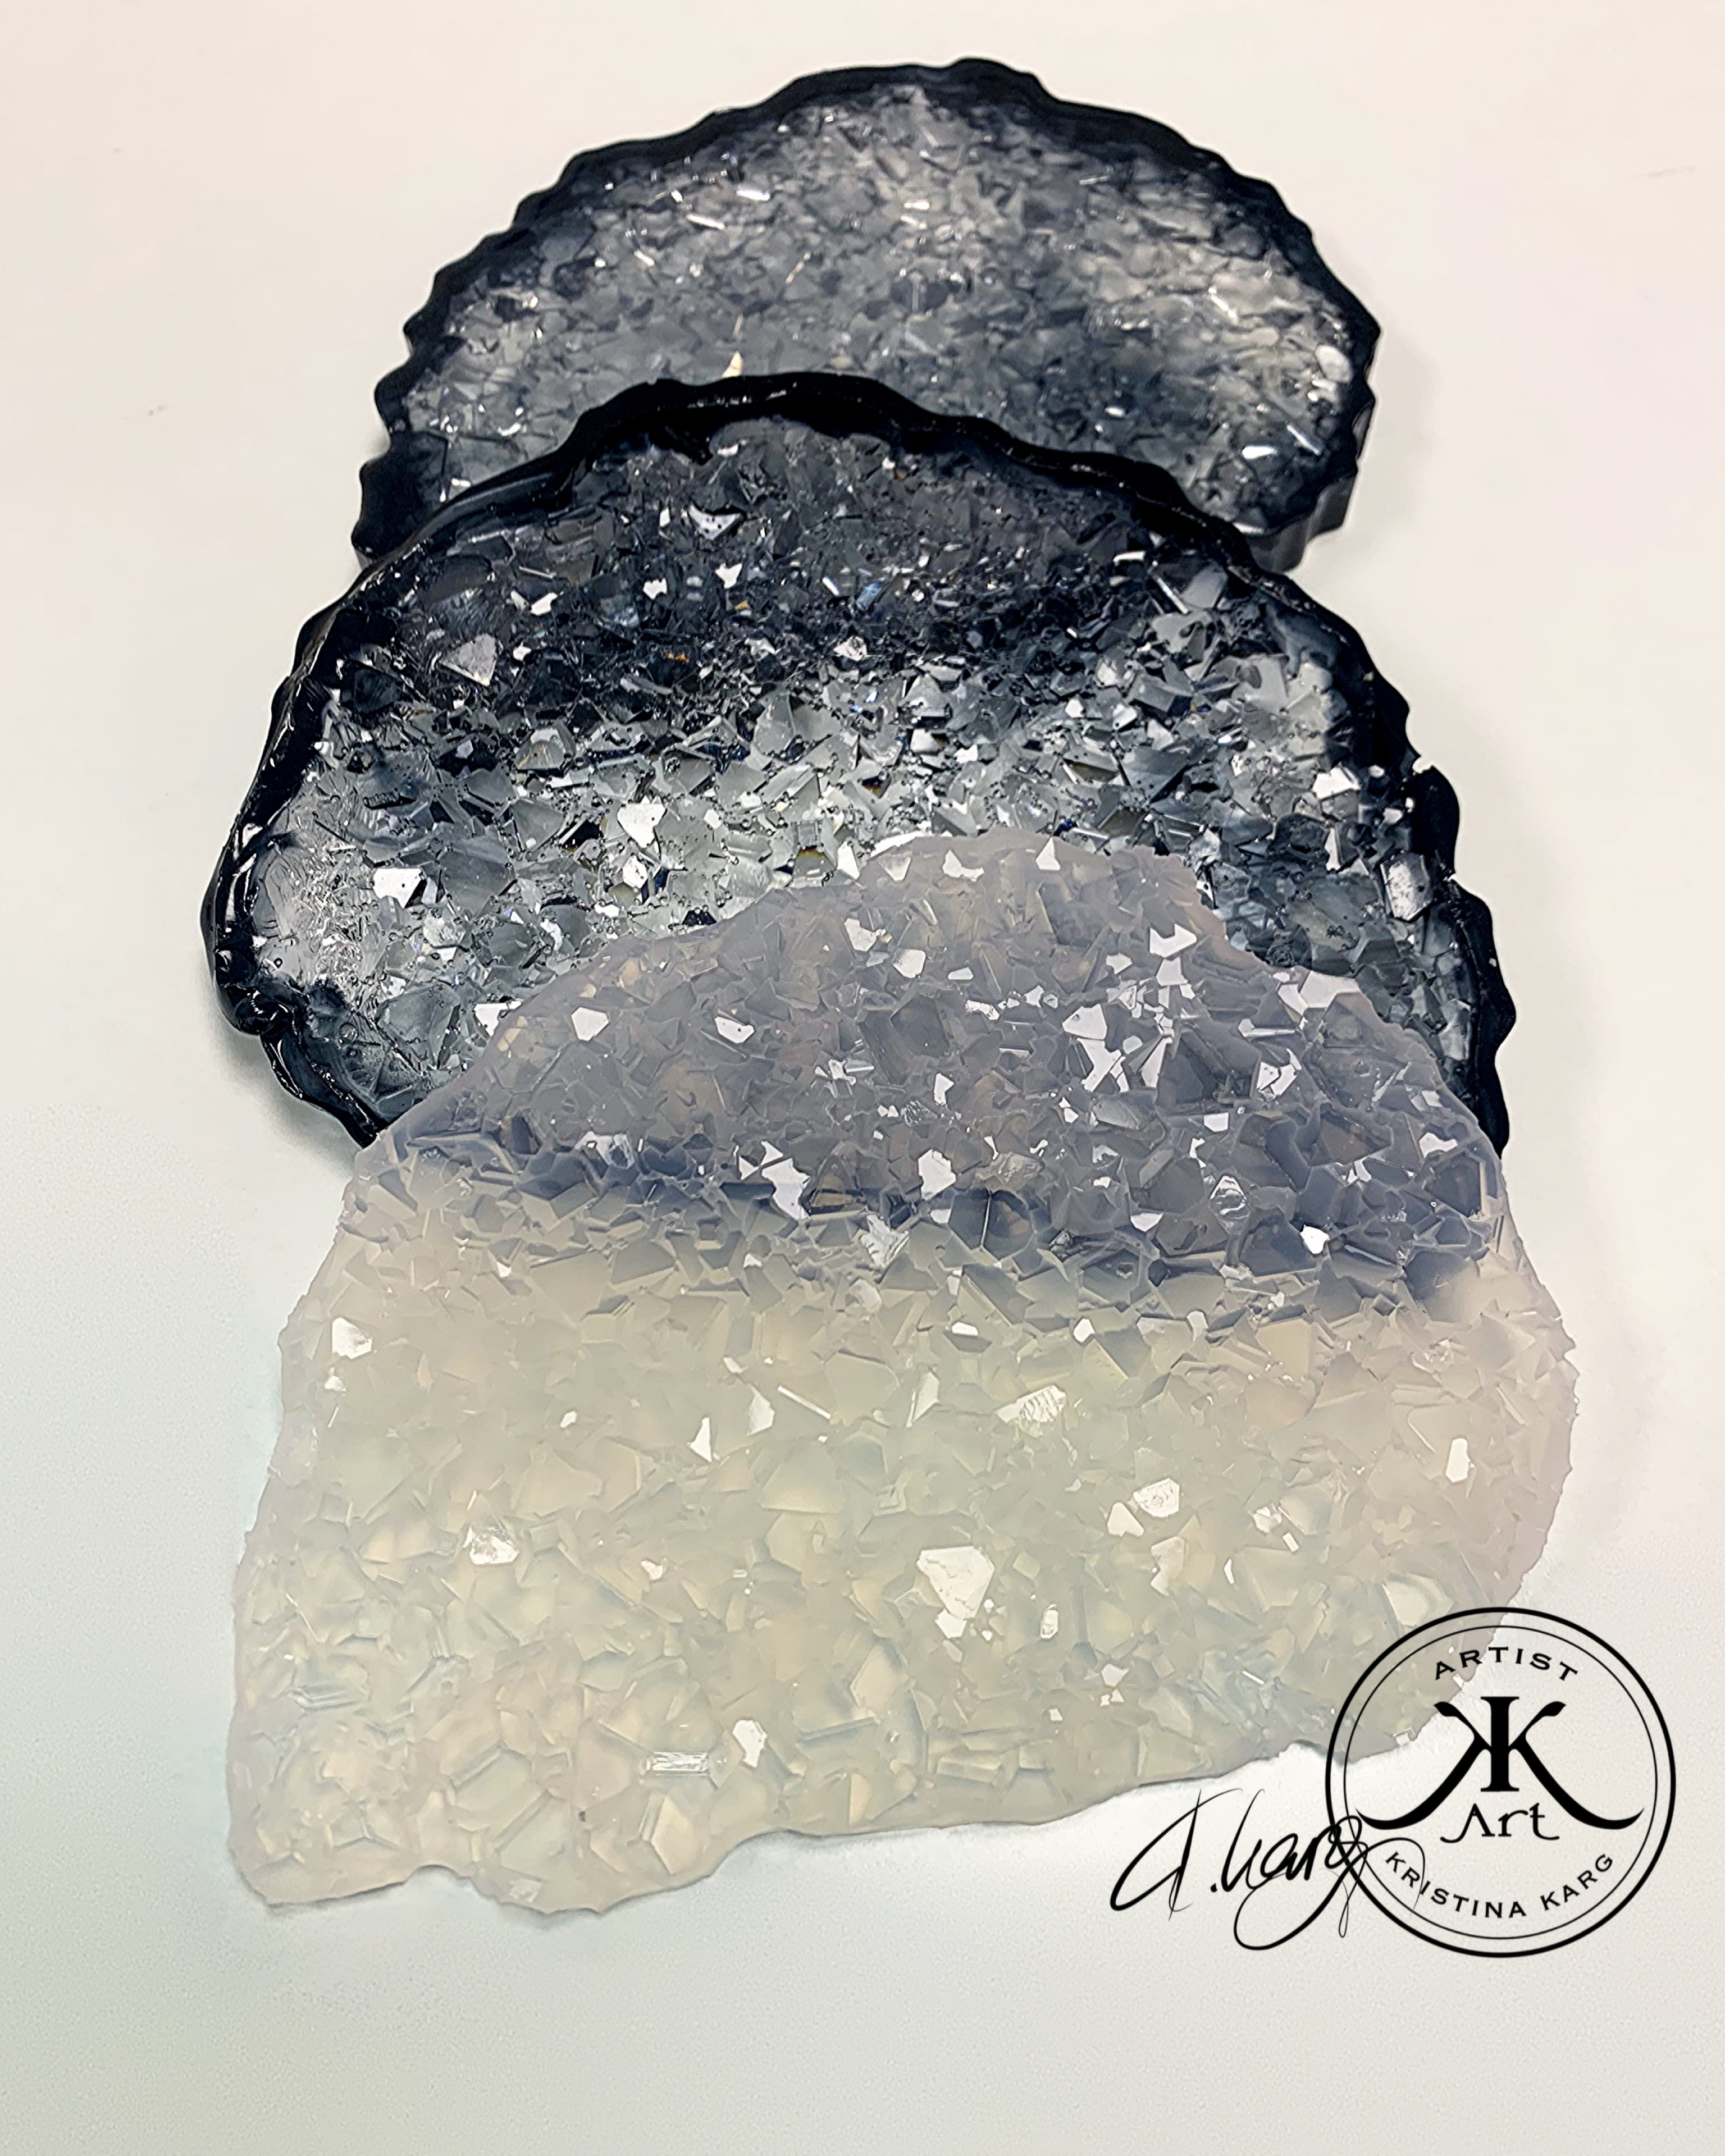 Geode crystal addon for coasters 5.7 x 4.3 inch (145 x 110mm)